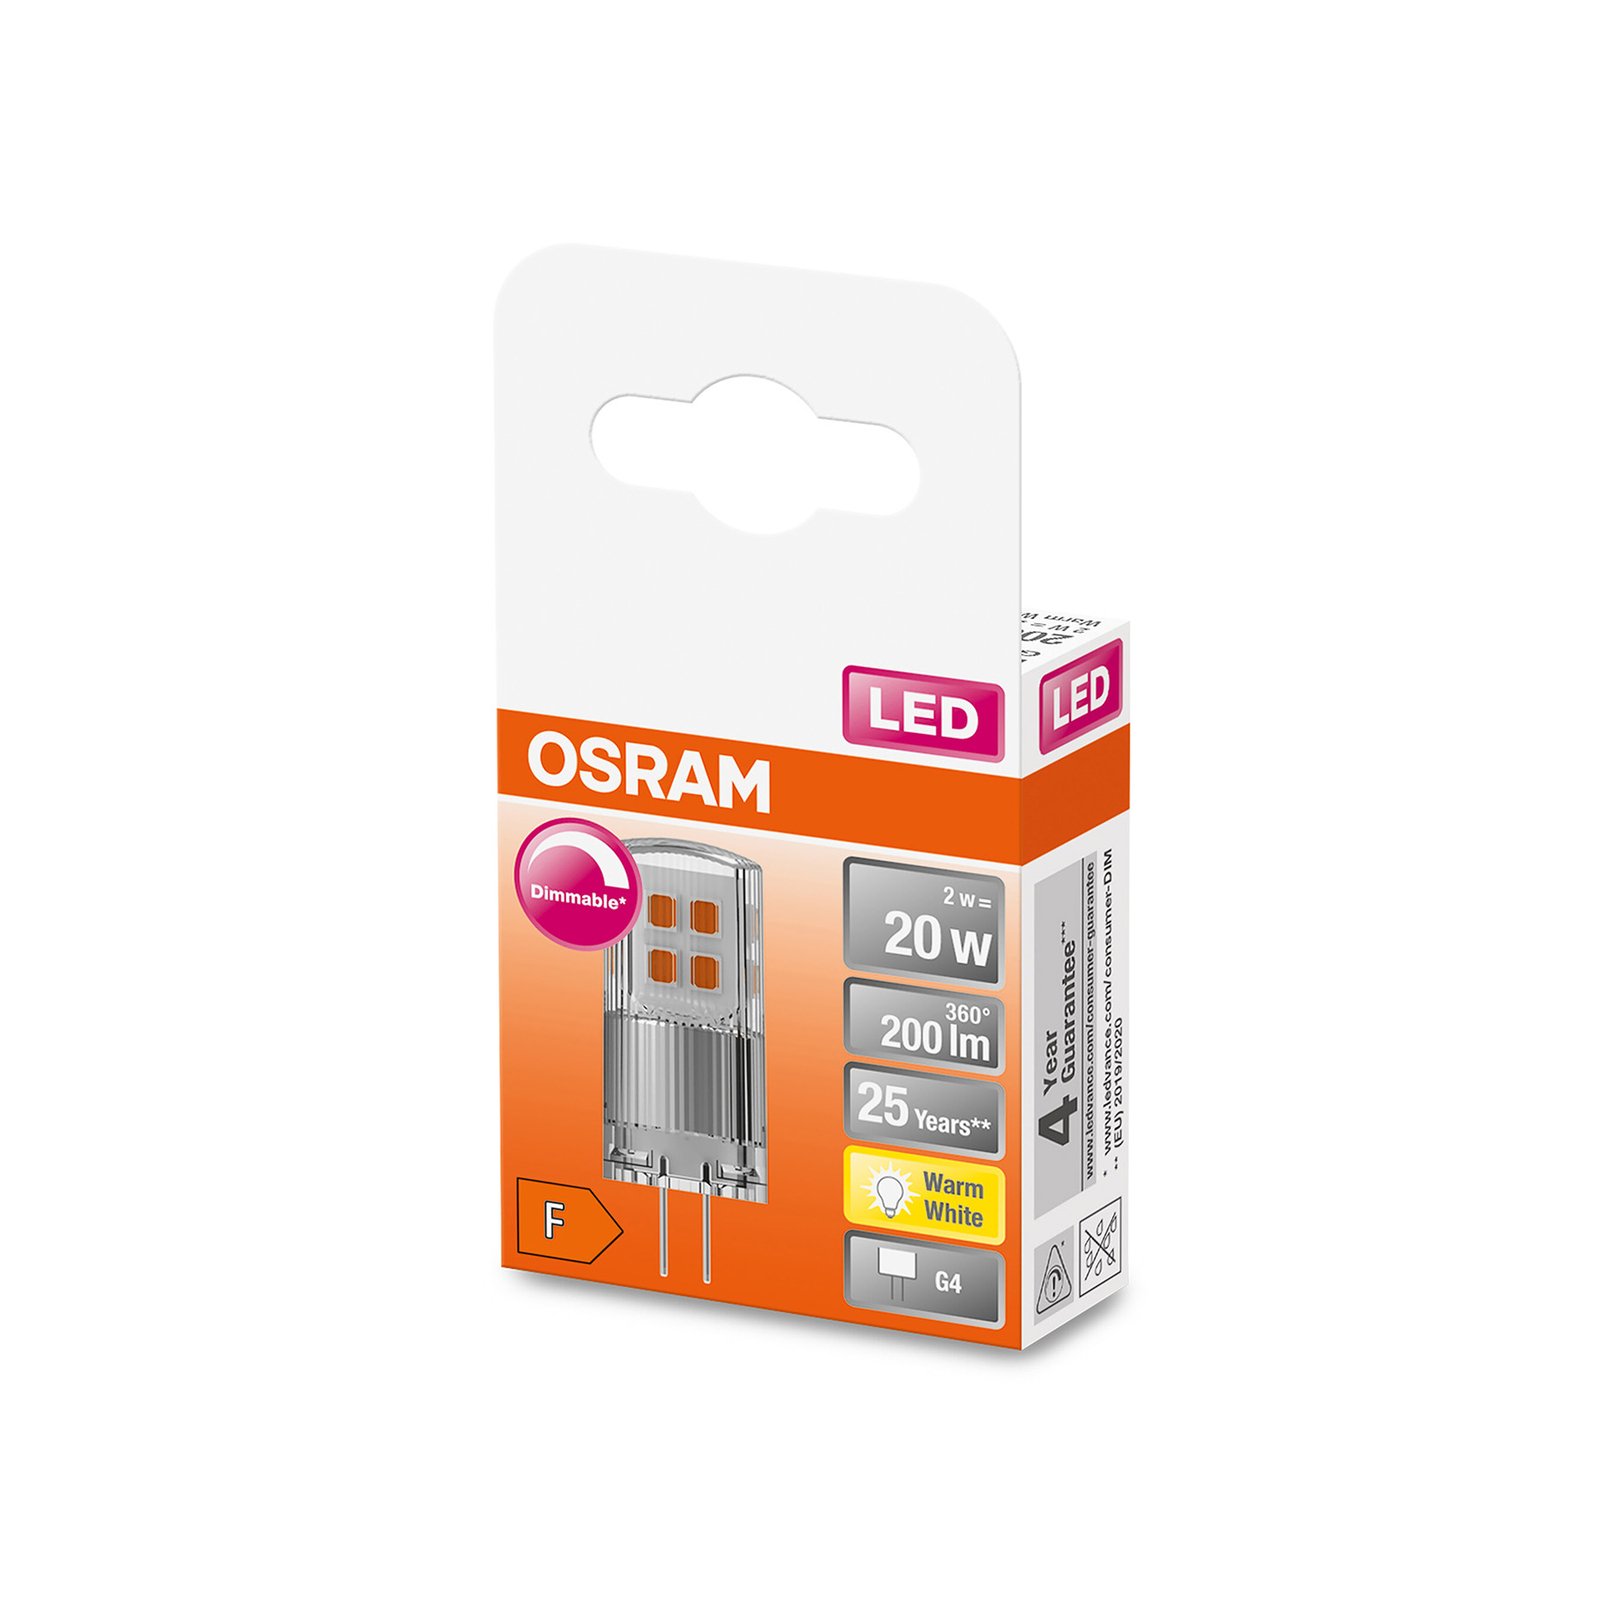 OSRAM PIN 12V LED broche G4 2 W 200 lm dimmable